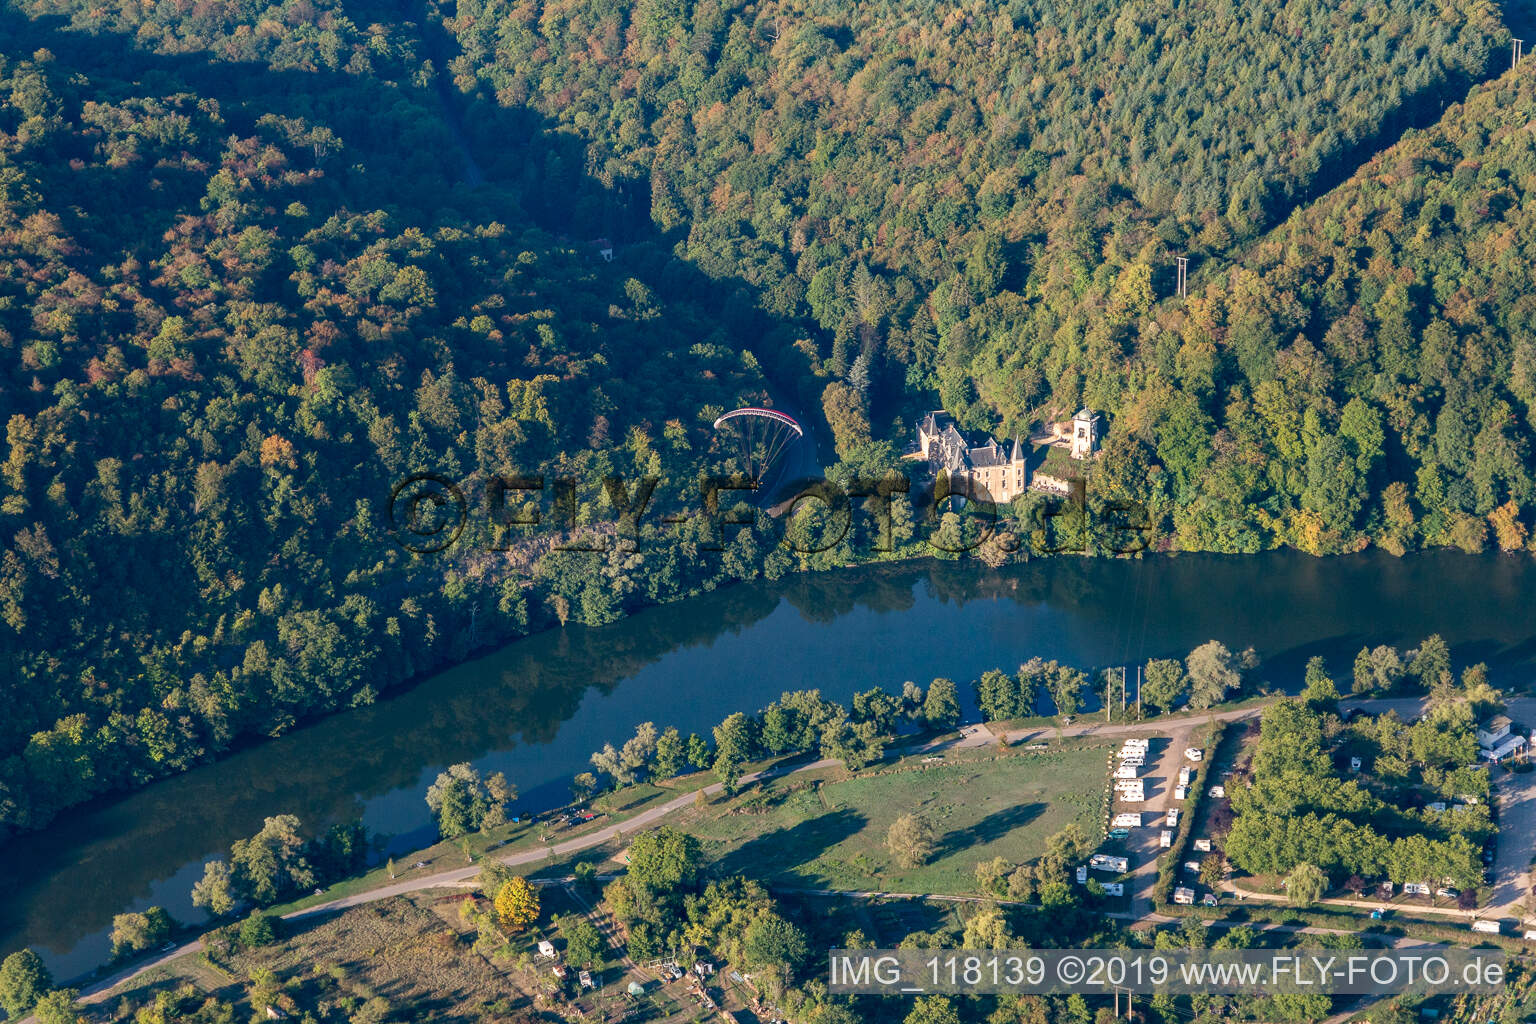 Aerial view of Chateau de la Flie on the Moselle in Liverdun in the state Meurthe et Moselle, France